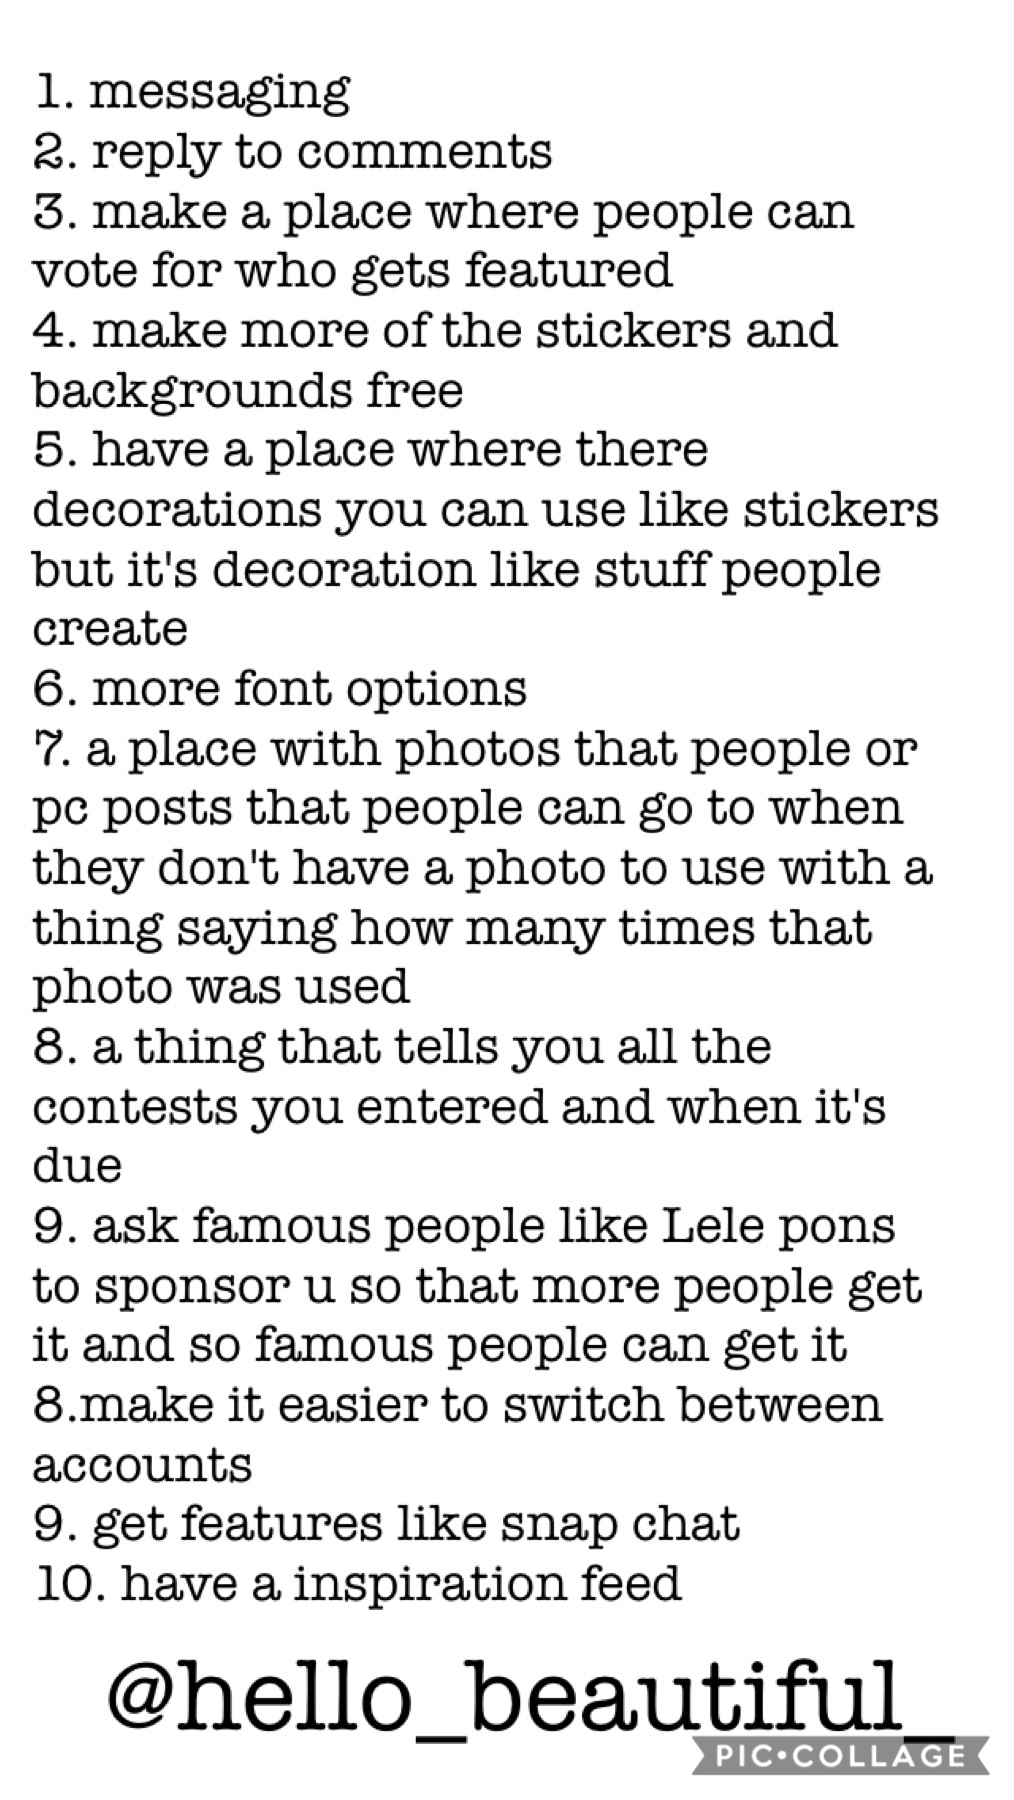 just some ideas pic should do what do u guys think?? repost and go to the feed back forums and put this stuff on their becuase it won't let me!!  i love pc!!!!!!!!